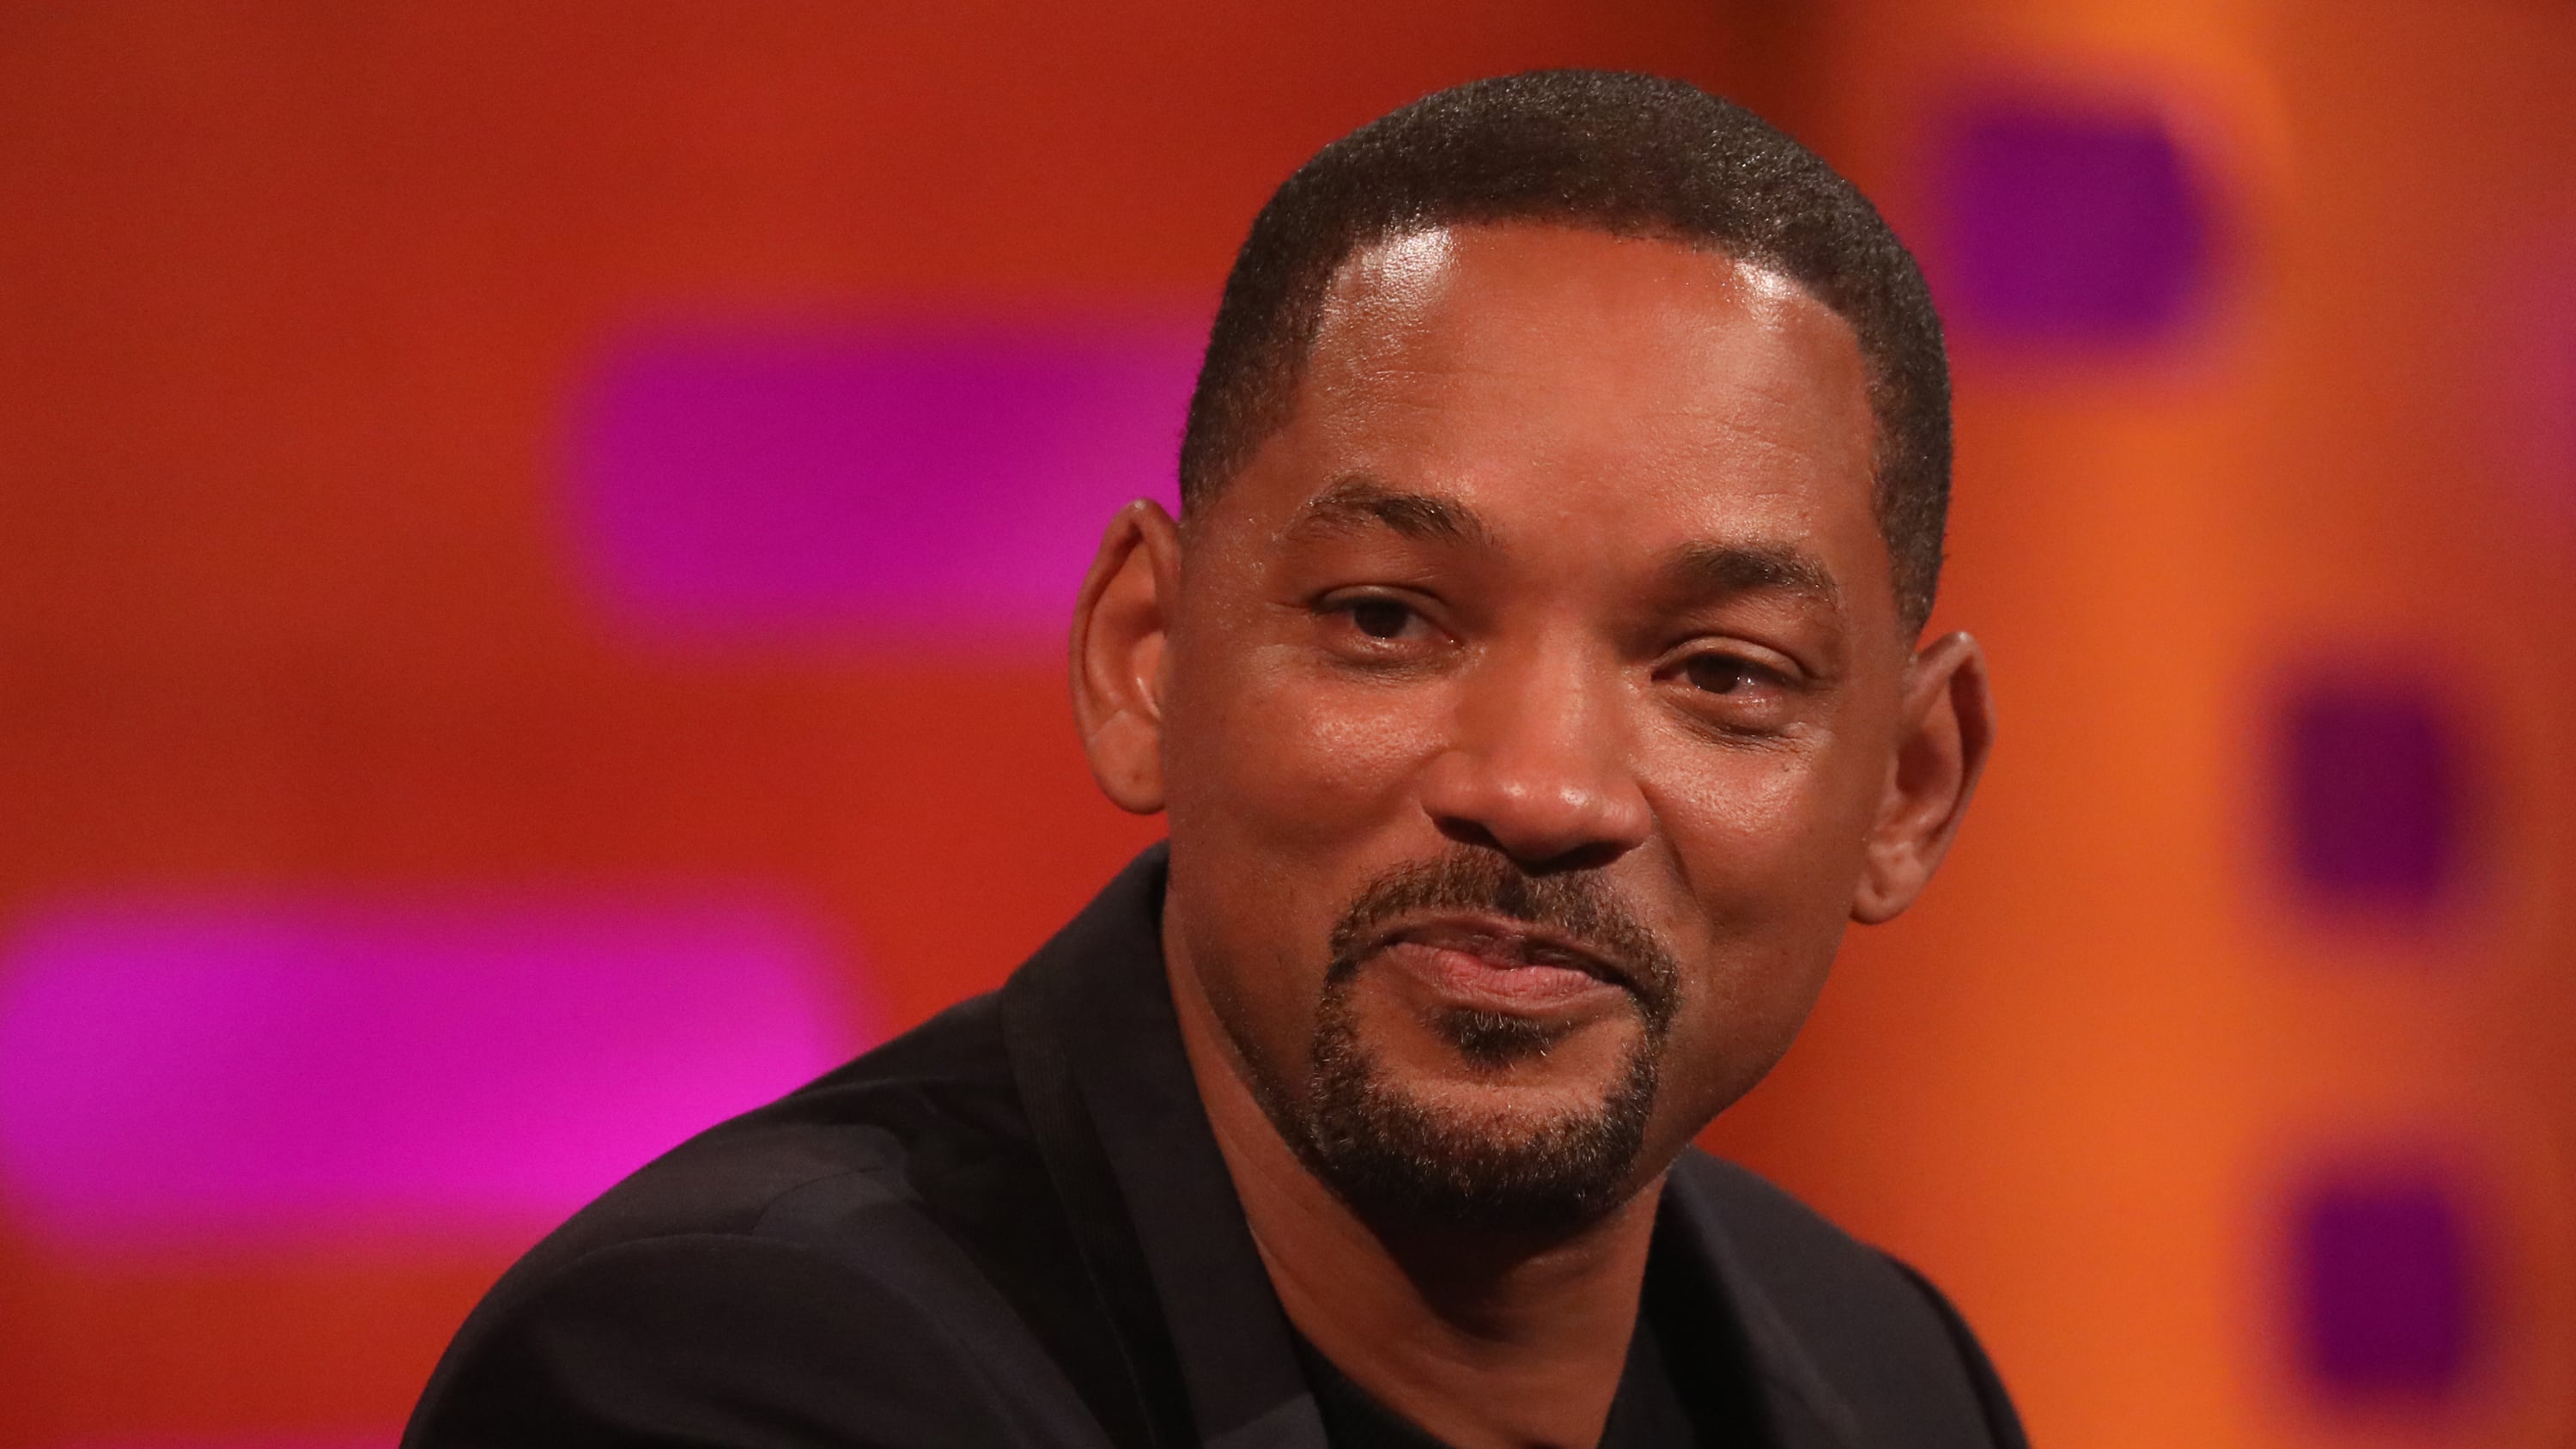 Will Smith was among the stars to celebrate July 4